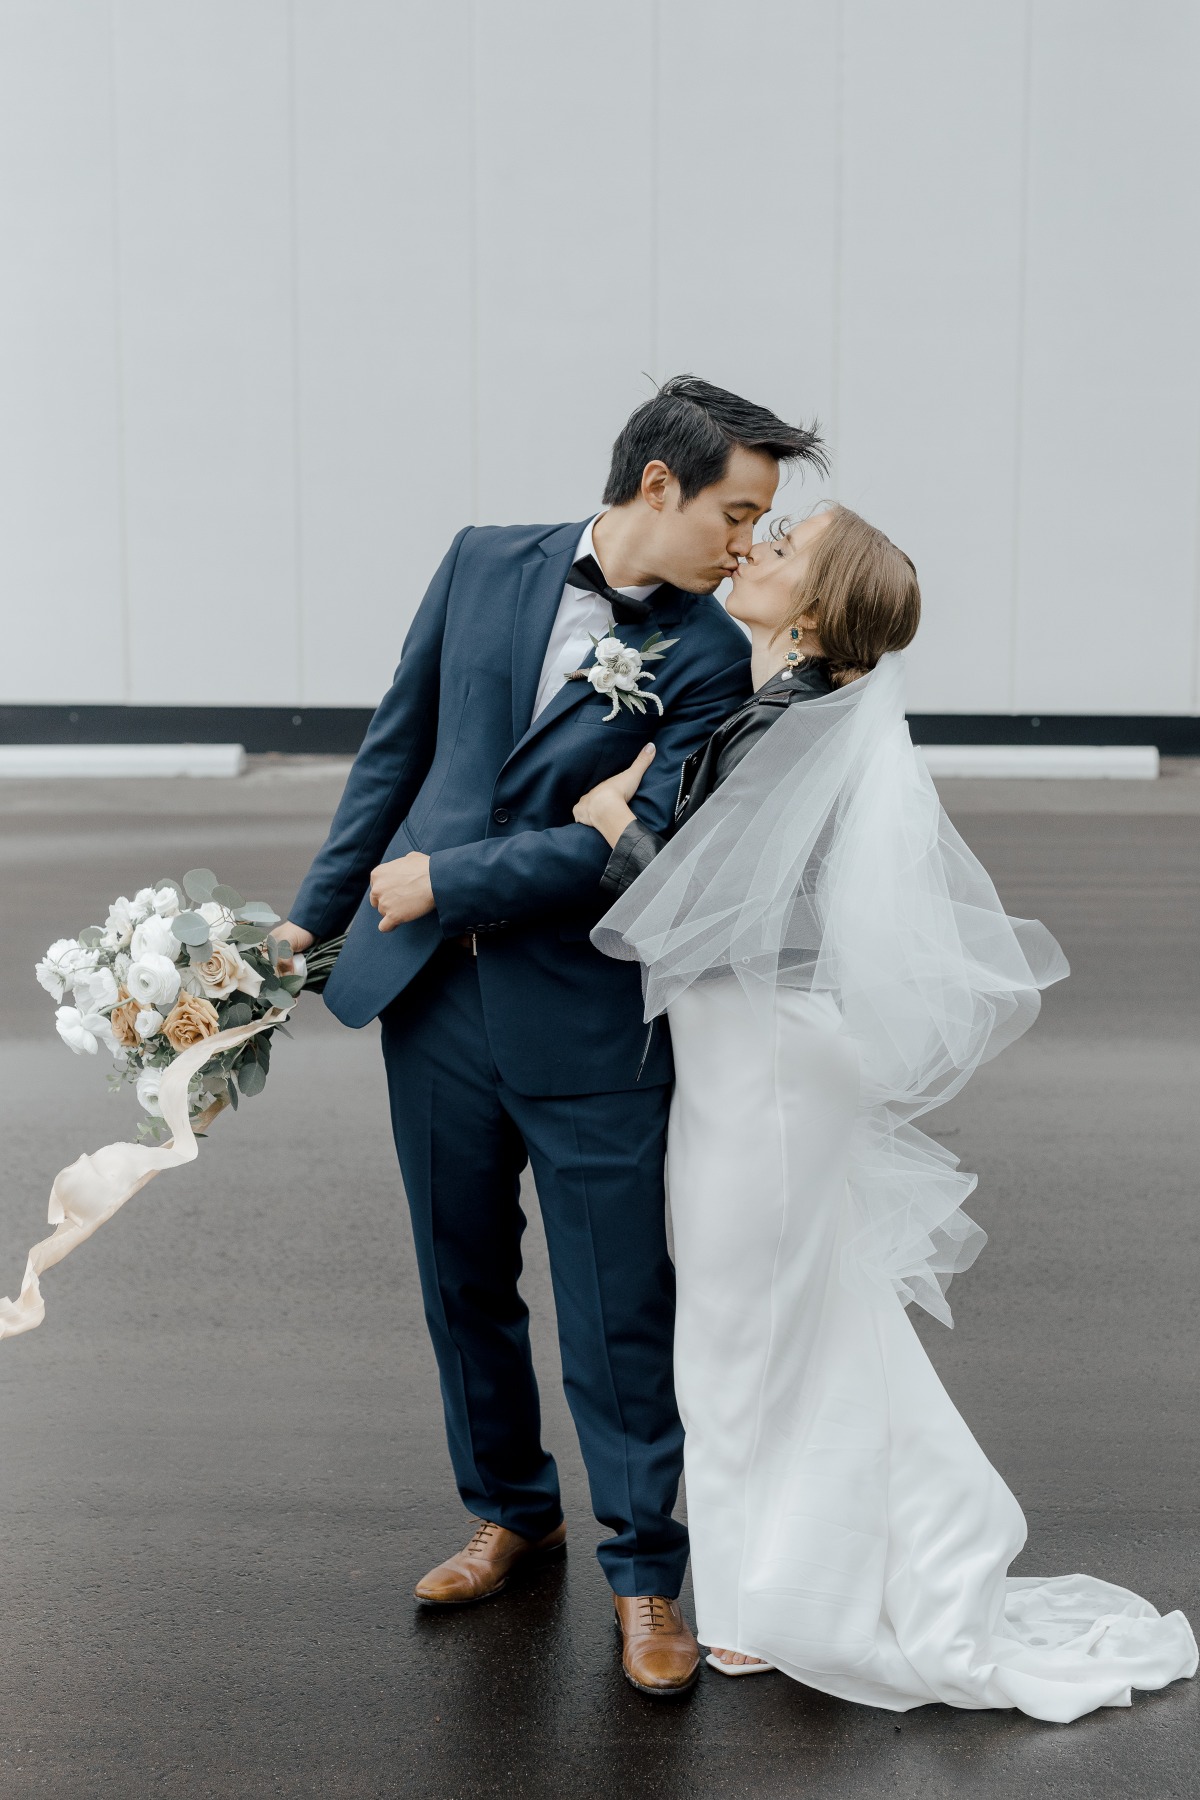 Bride and groom kissing while bride wears leather jacket